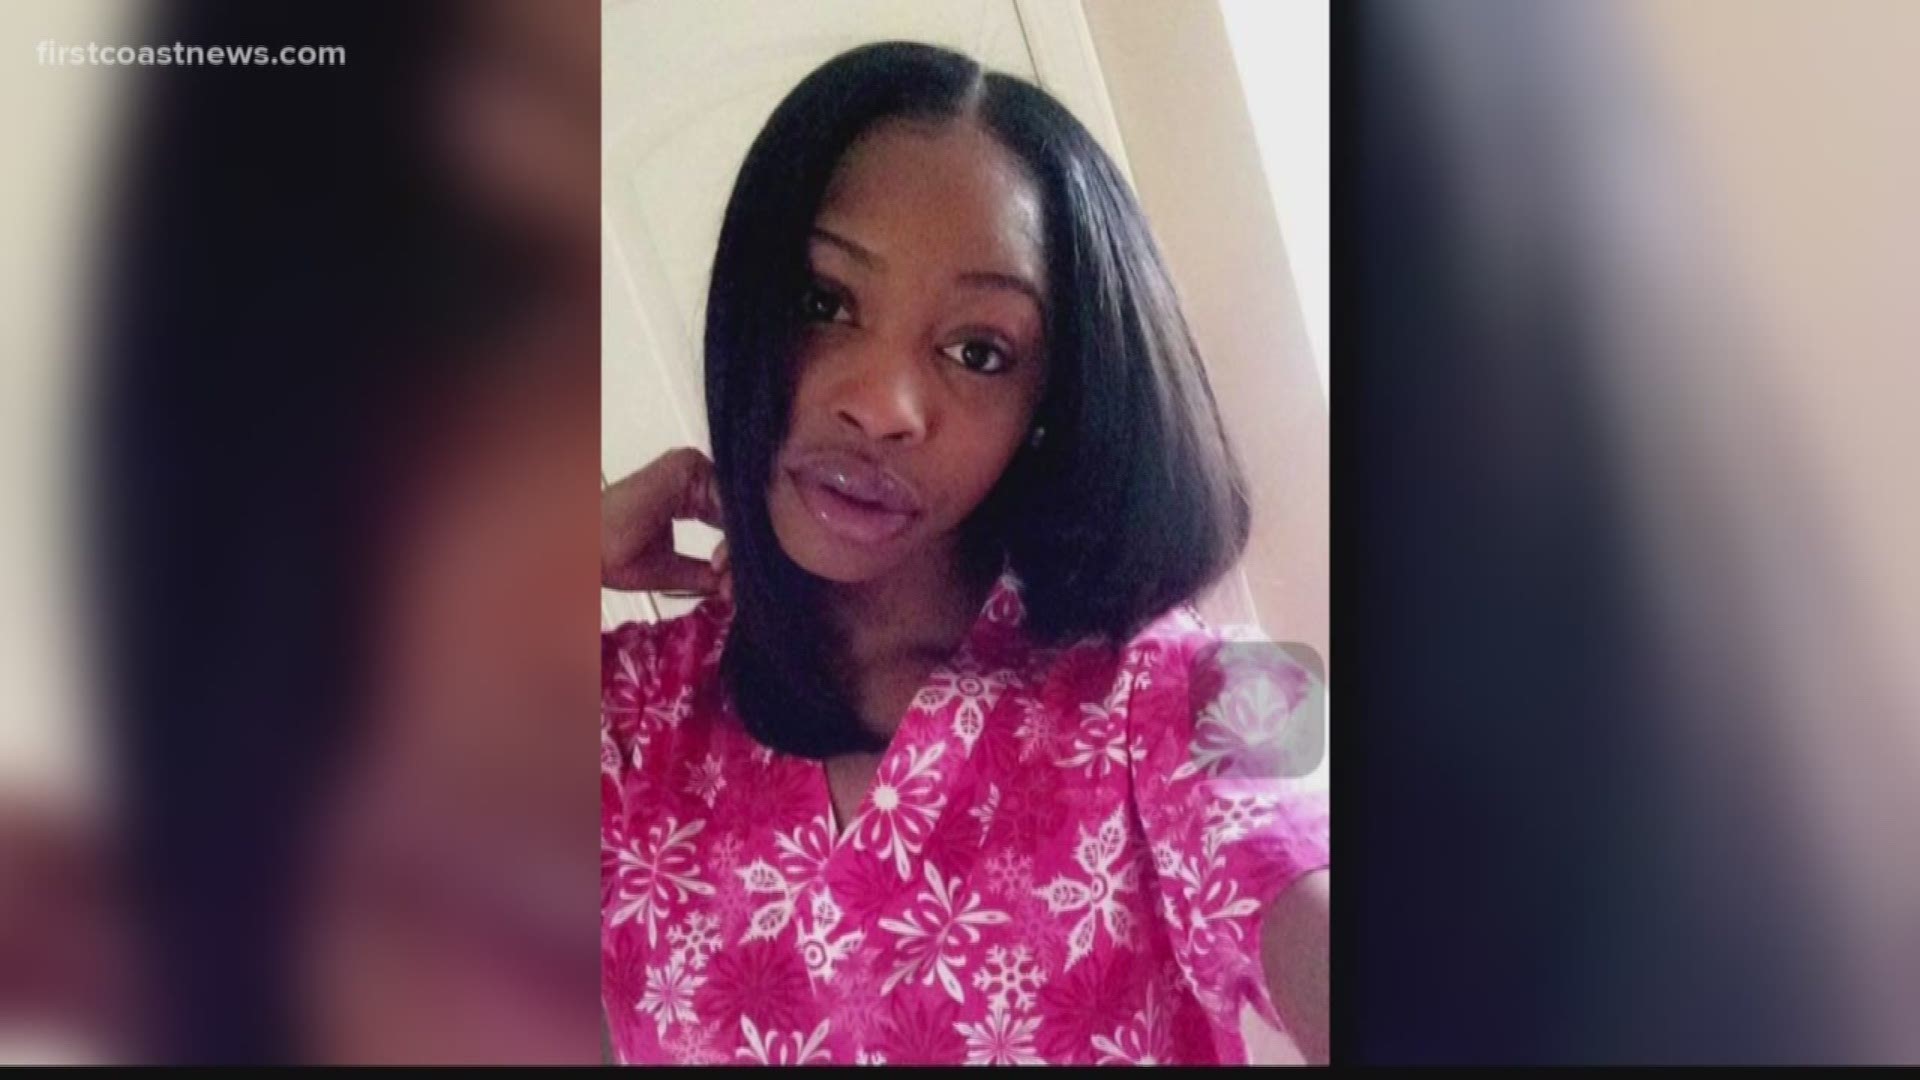 A 21-year-old Little Rock, Ark. woman visiting Jacksonville died at a local hospital after being shot.